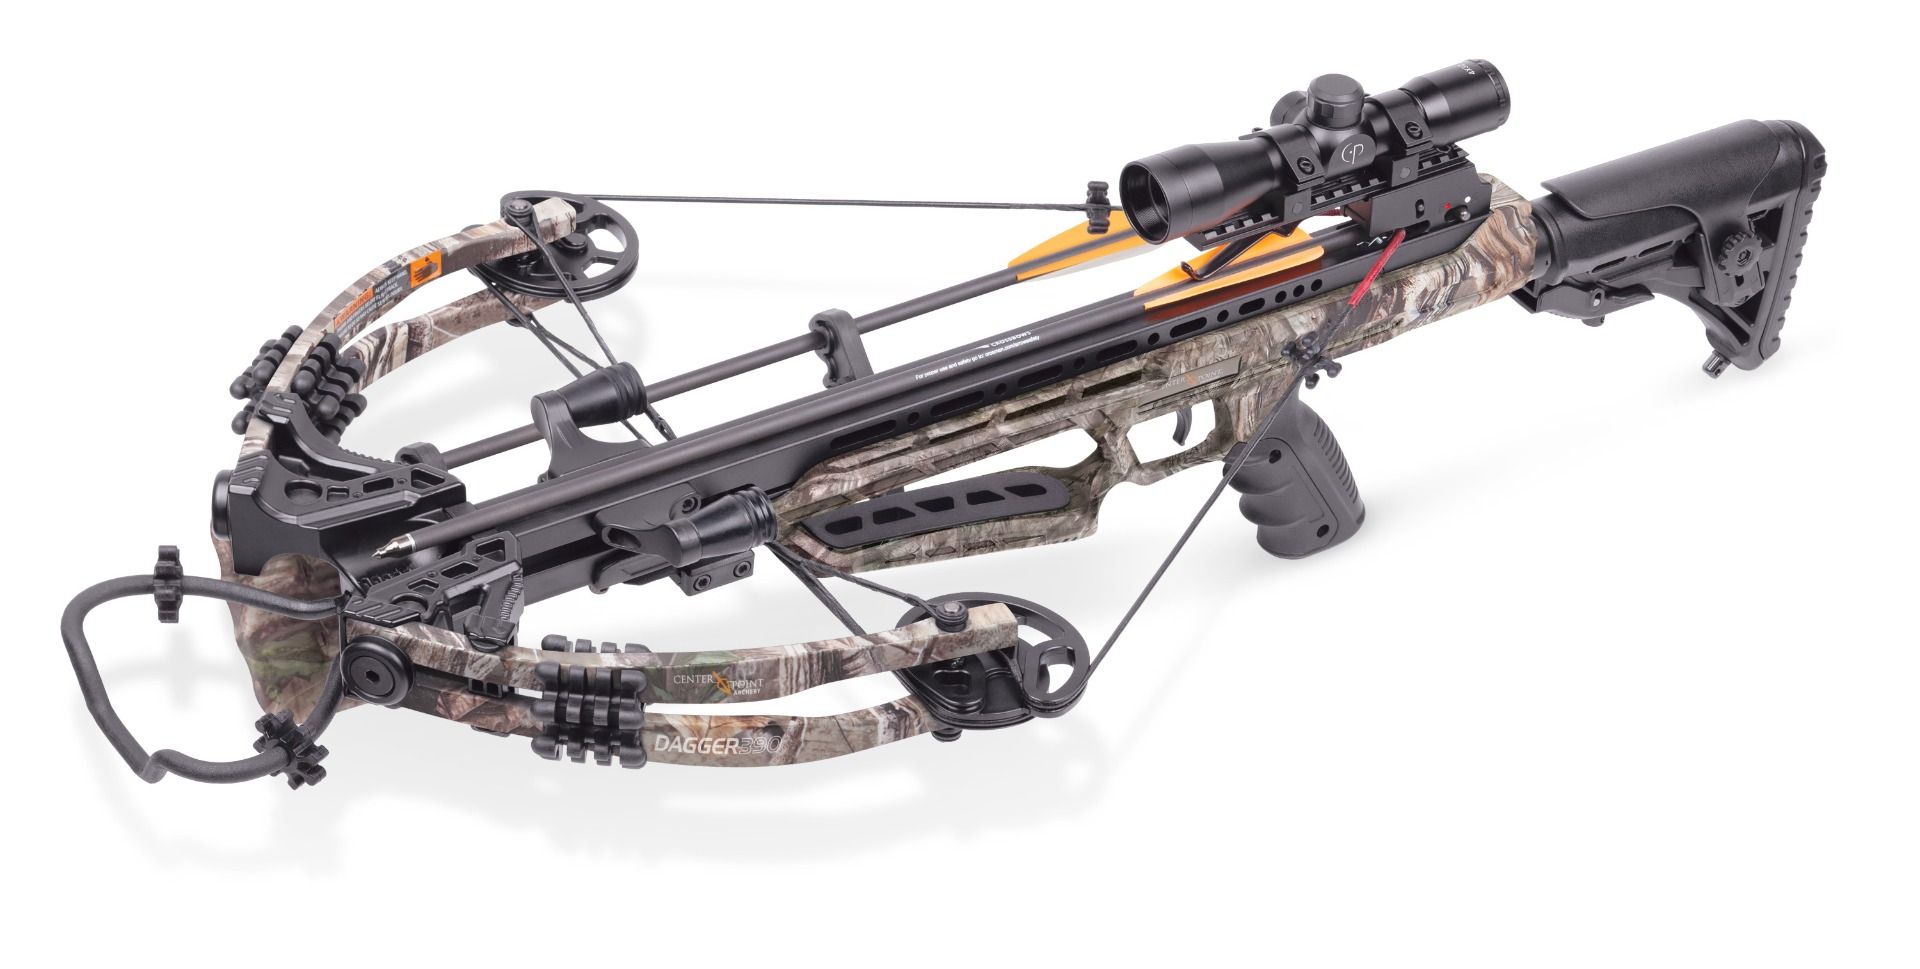 CENTERPOINT DAGGER 390 CROSSBOW – All Things Outdoors